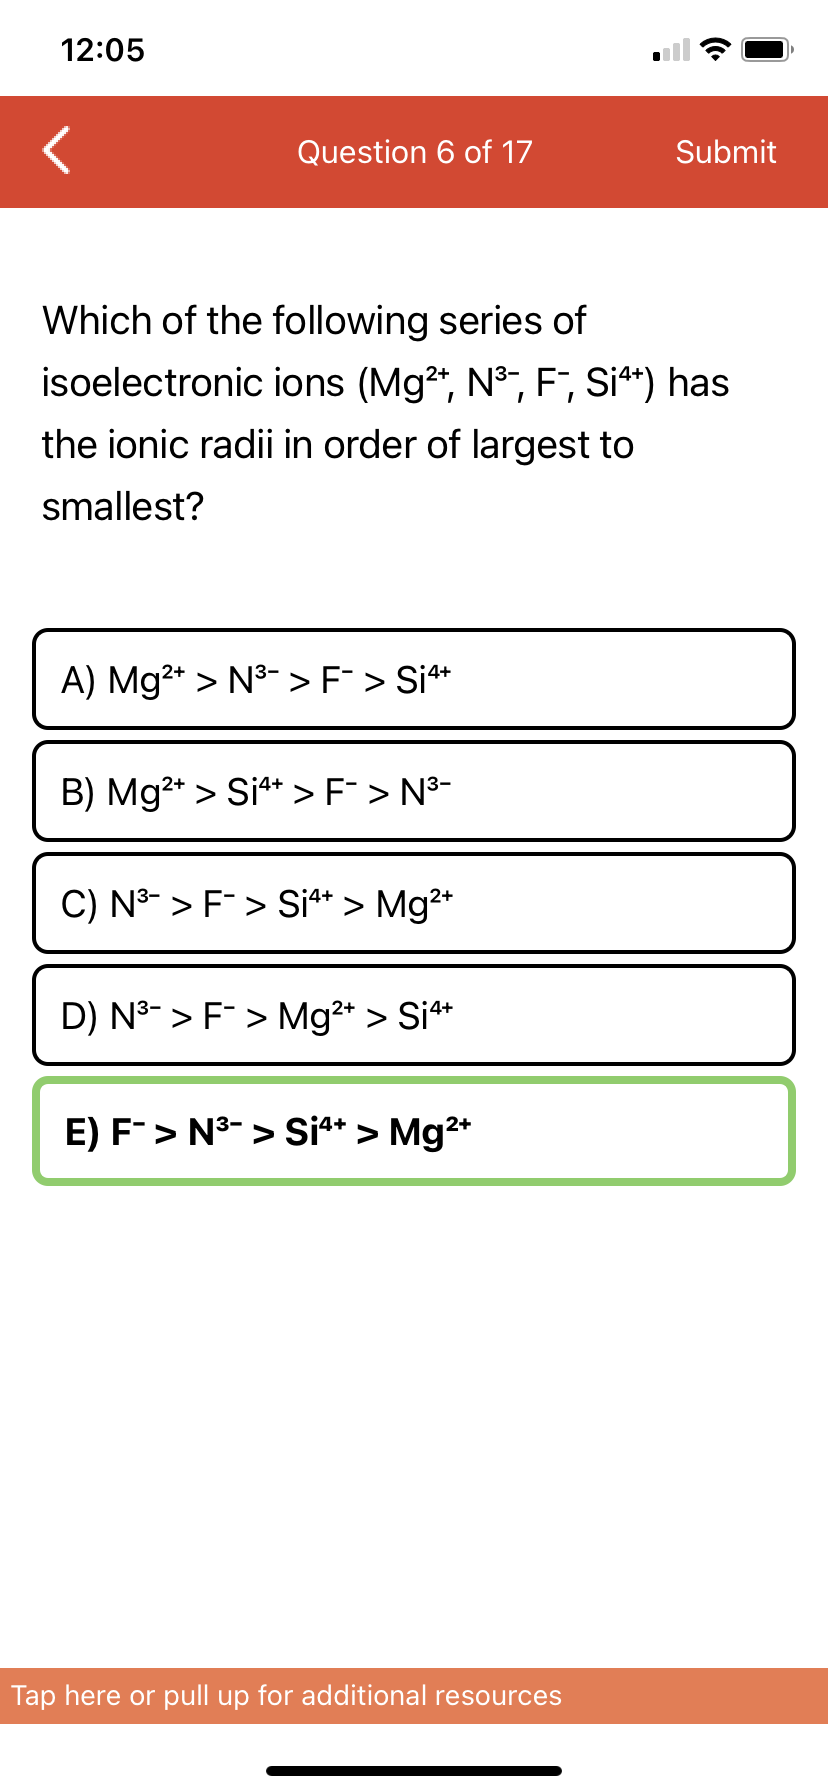 12:05
Question 6 of 17
Submit
Which of the following series of
isoelectronic ions (Mg2", N°, F, Si**) has
the ionic radii in order of largest to
smallest?
A) Mg2* > N3- > F > Si*
B) Mg2* > Si** > F¯ > N³-
C) N3- > F> Si** > Mg2*
D) N3- > F > Mg2* > Si**
E) F> N3- > Si** > Mg2*
Tap here or pull up for additional resources
